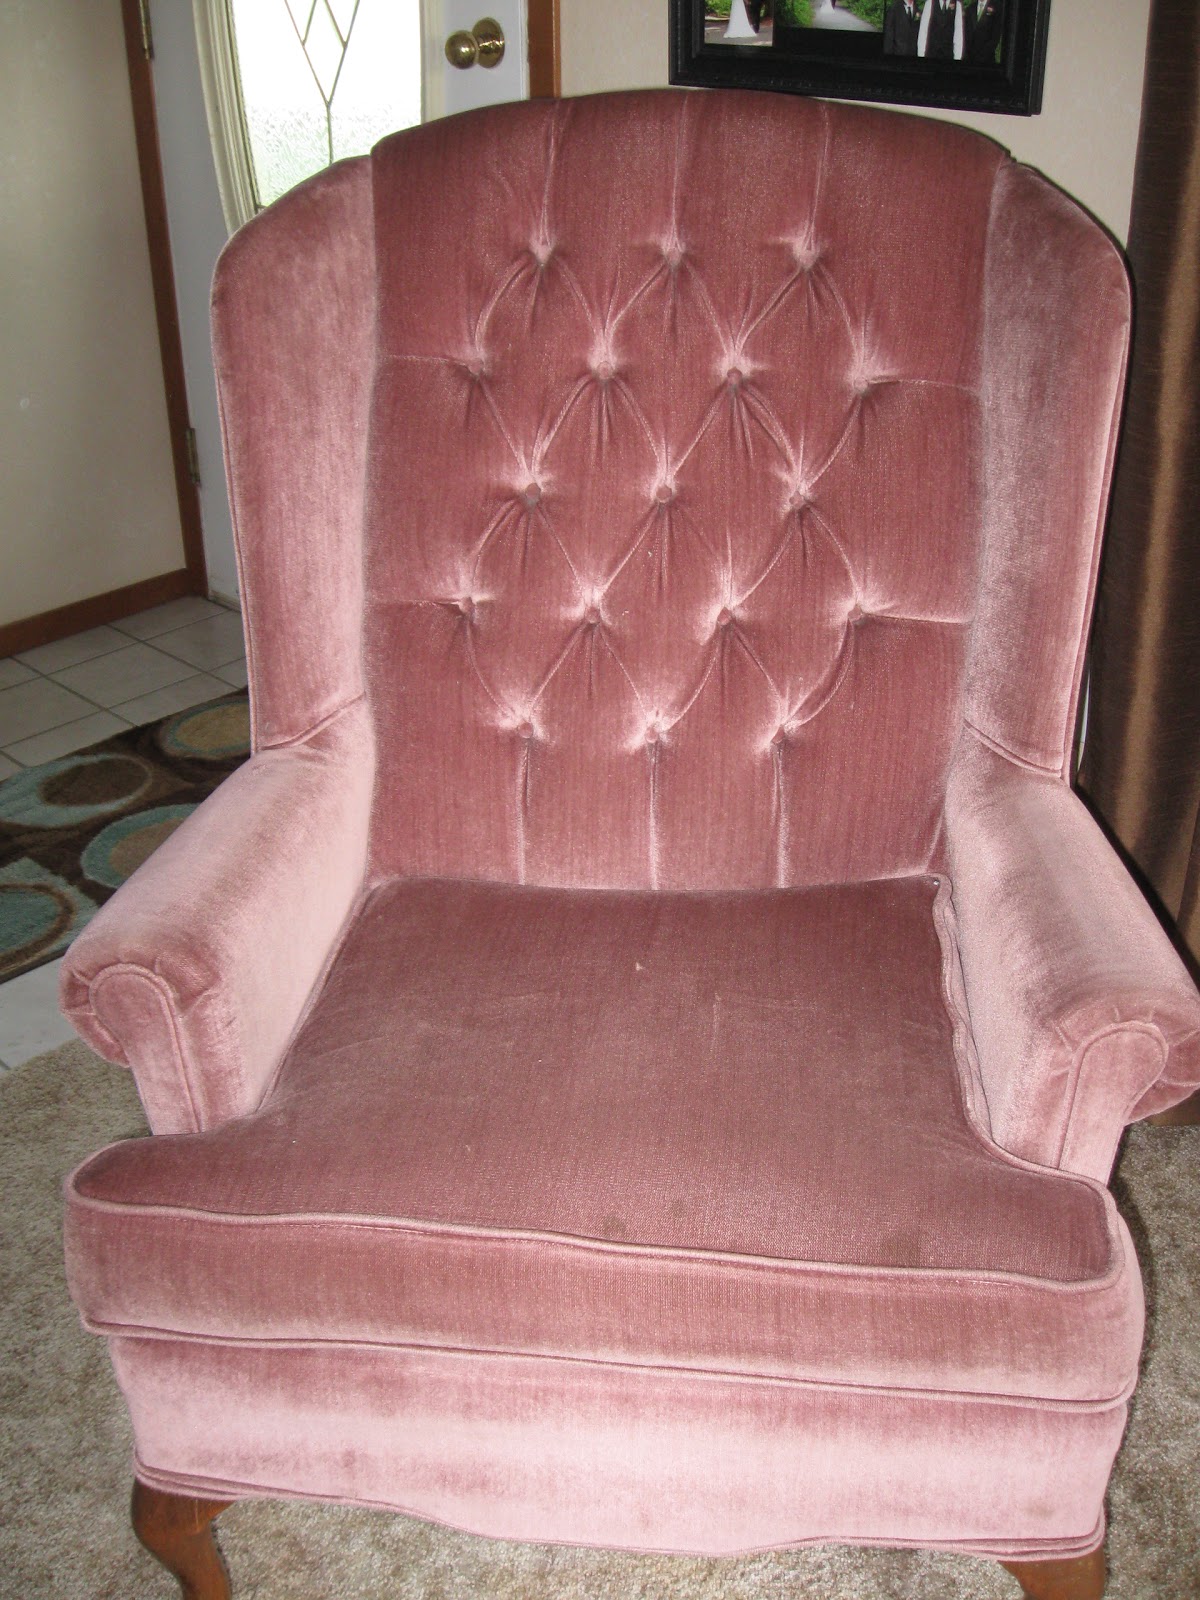 Thrifty Parsonage Living: Reupholstered Wingback Chair Revealed